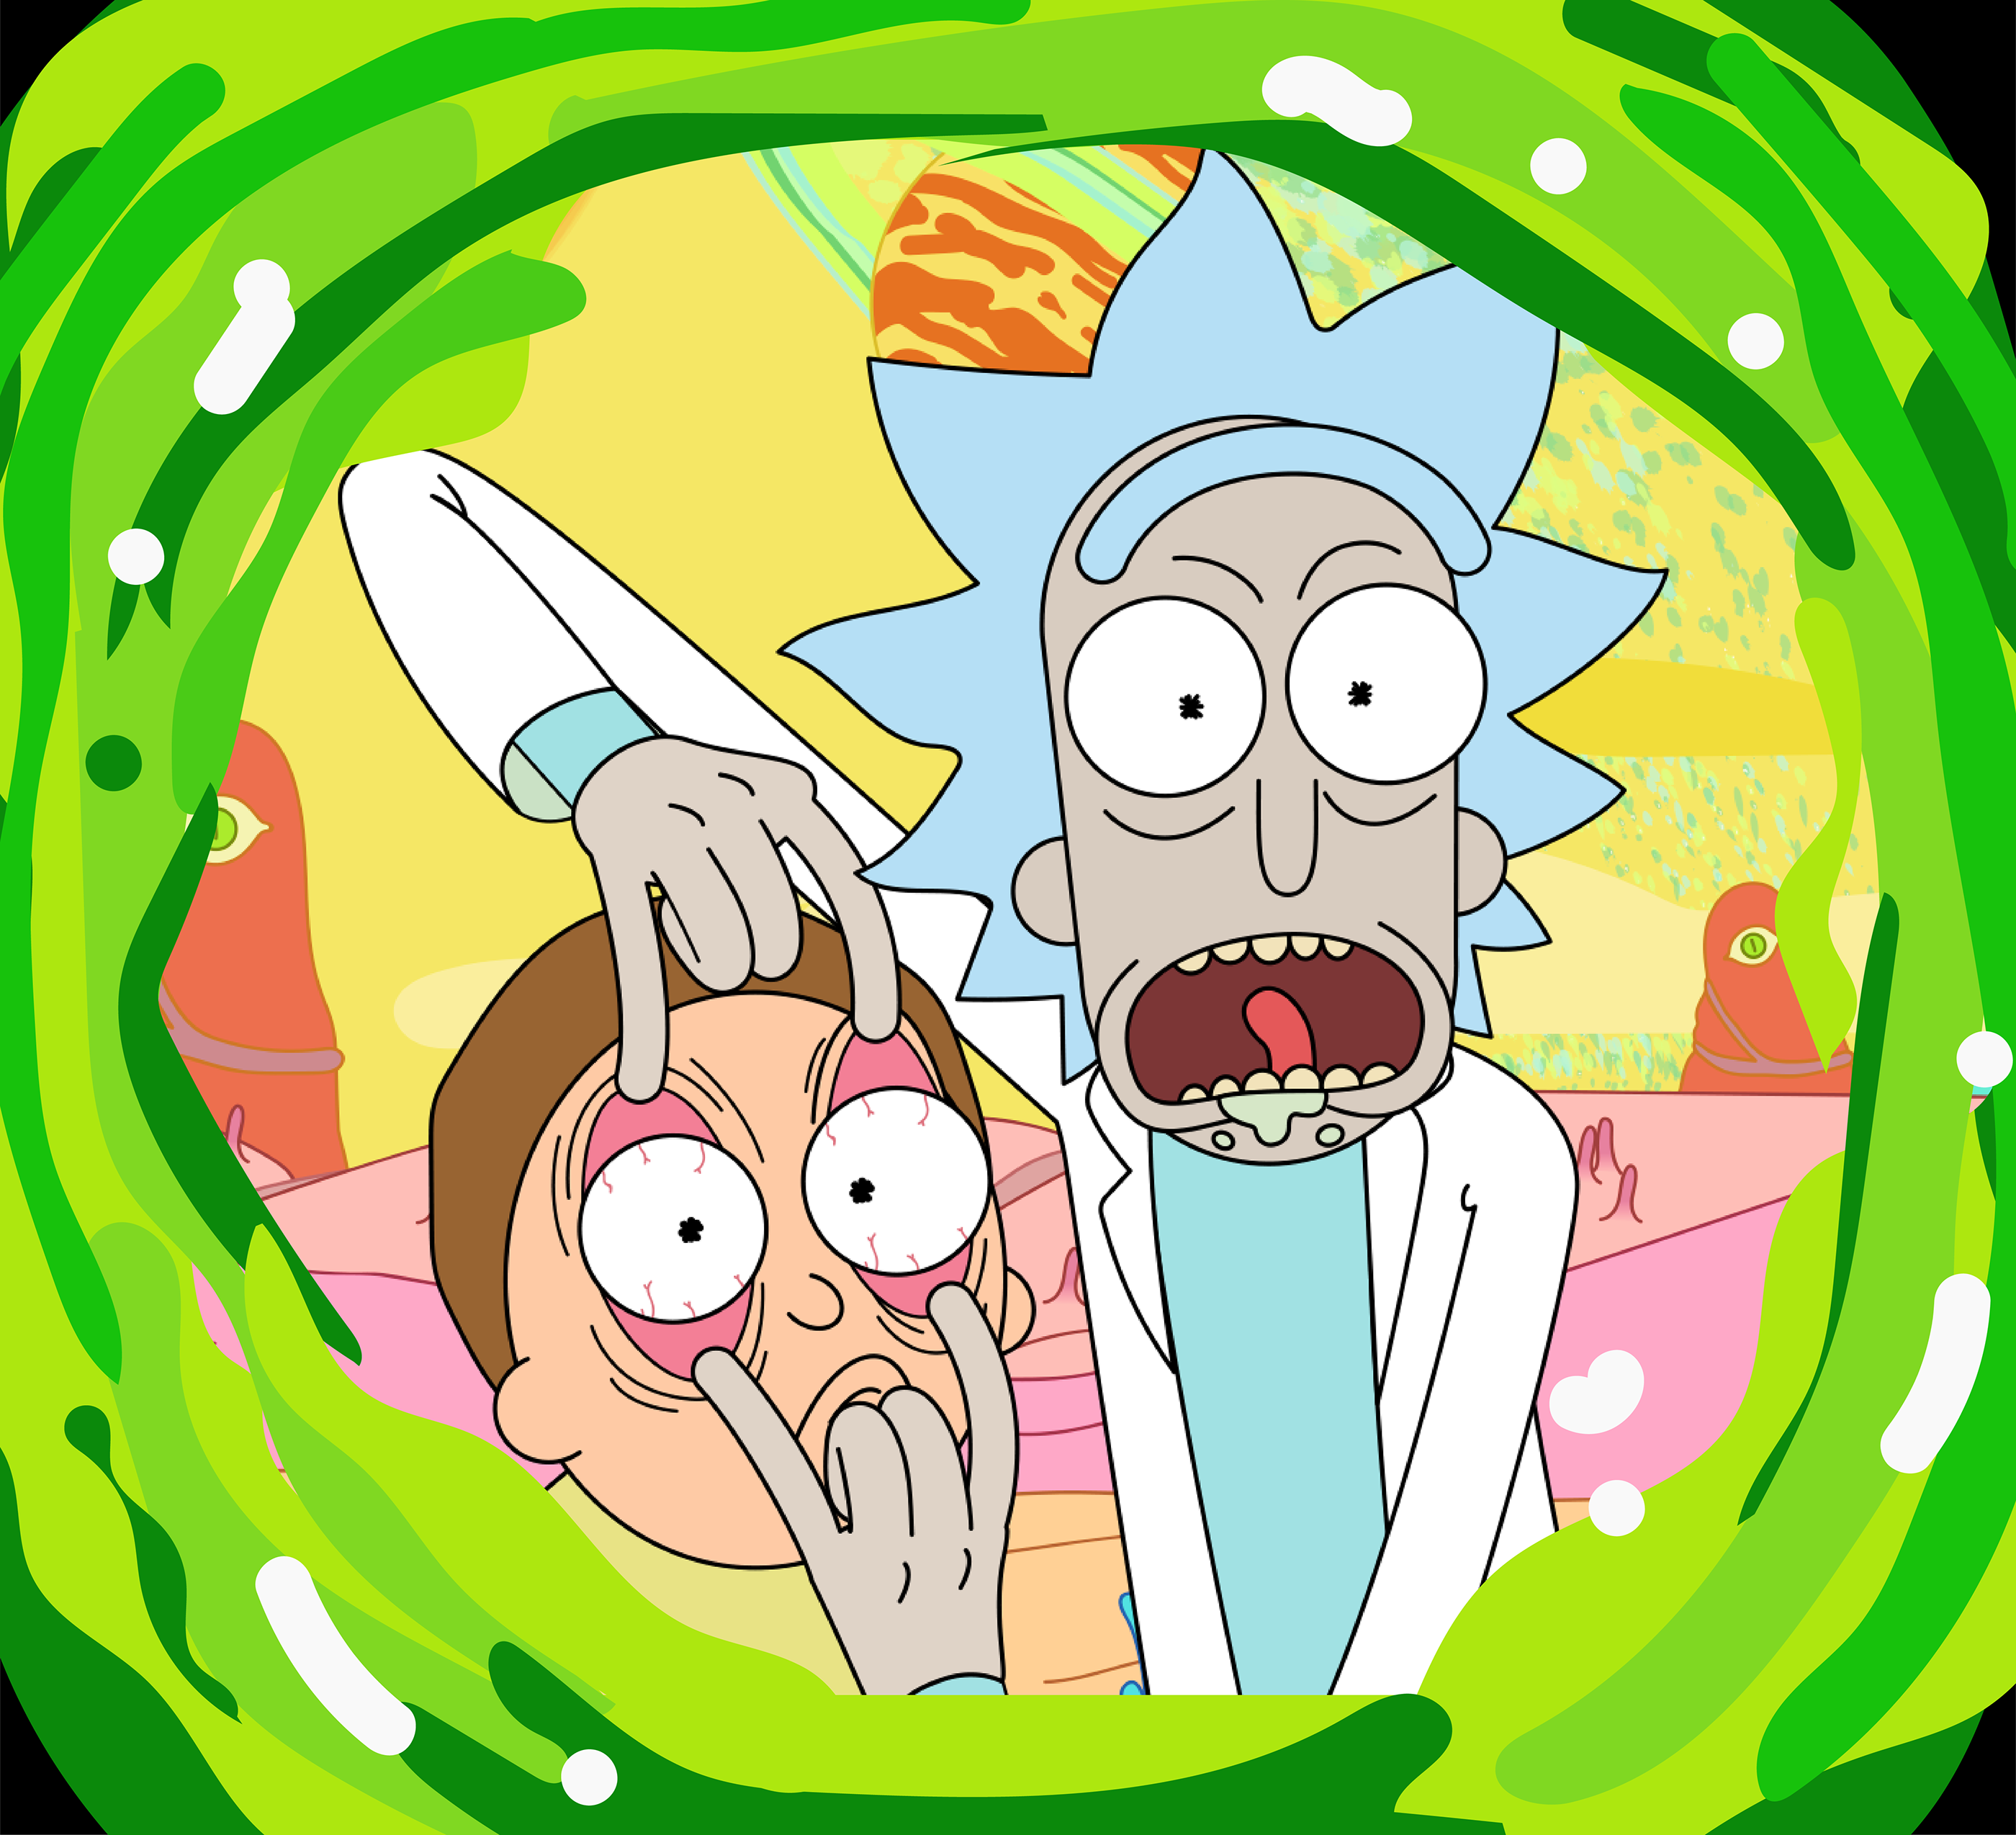 The Multiverse of Rick and Morty.